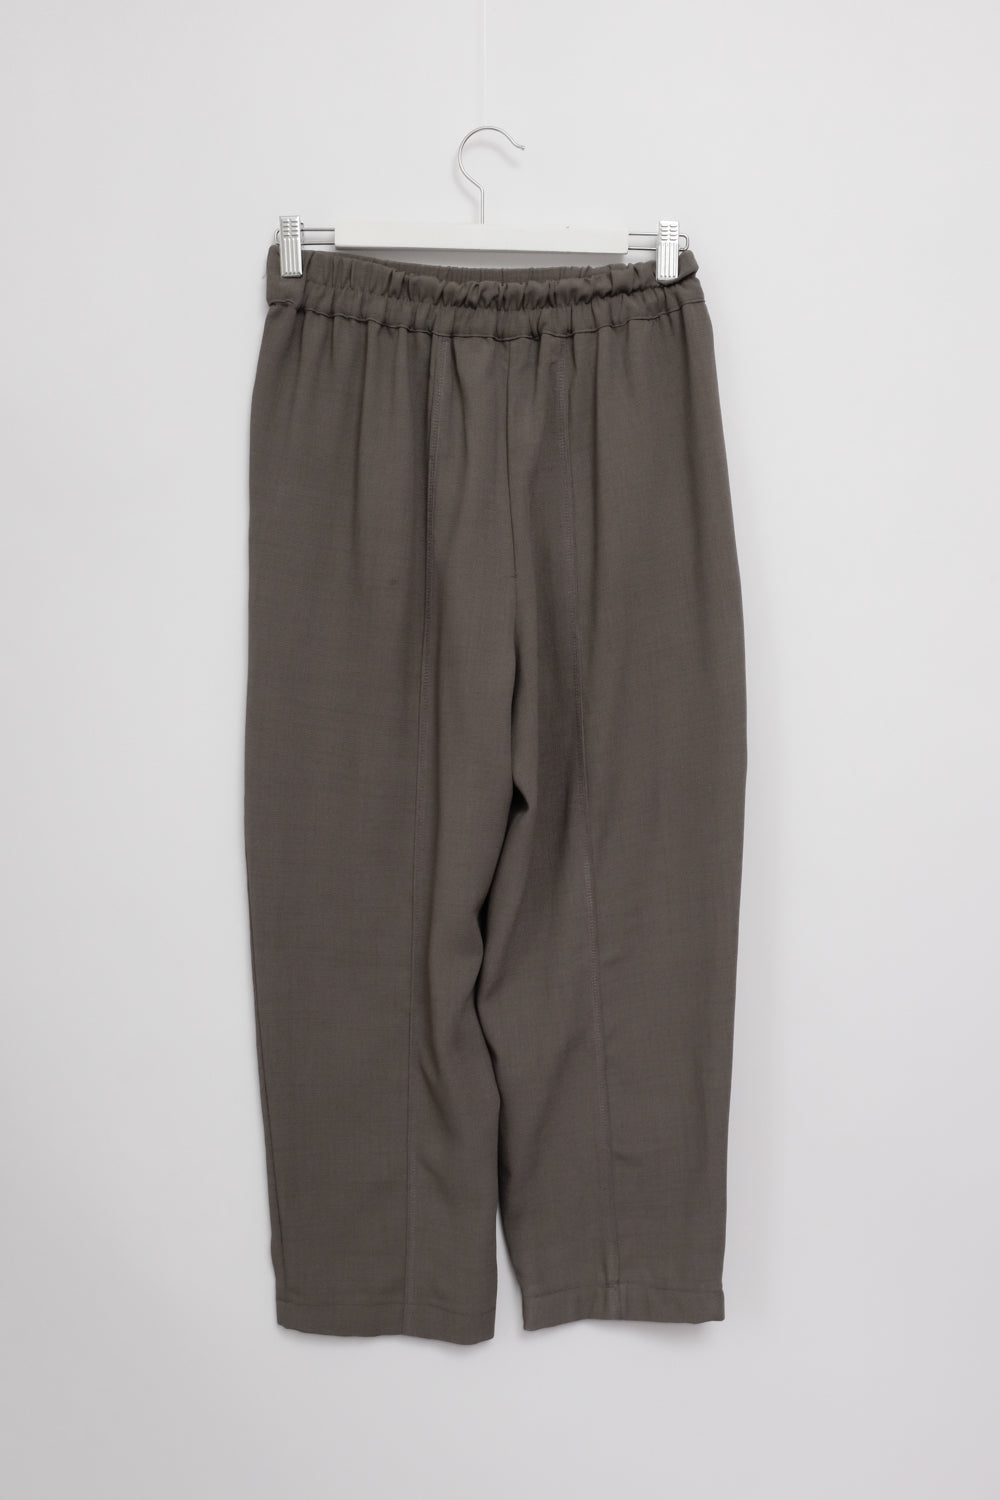 BROWN WIDE LEG RELAXED PANTS